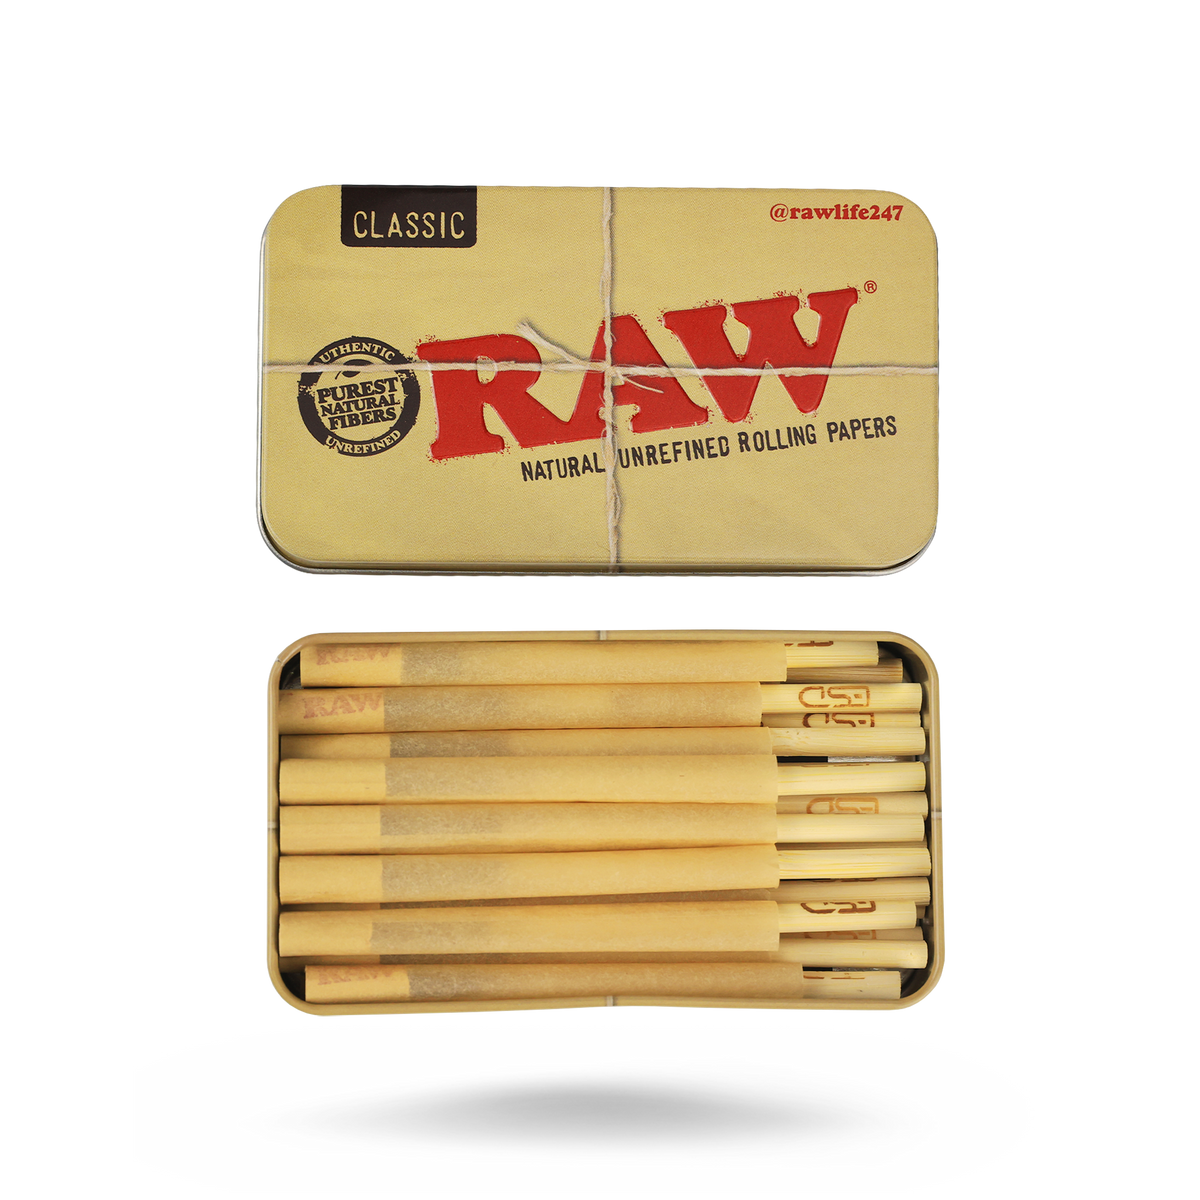 RAW Classic Cigarette Paper Tubes Bundle with Protective Tin Box Bundles WAR20016-MUSA02 esd-official